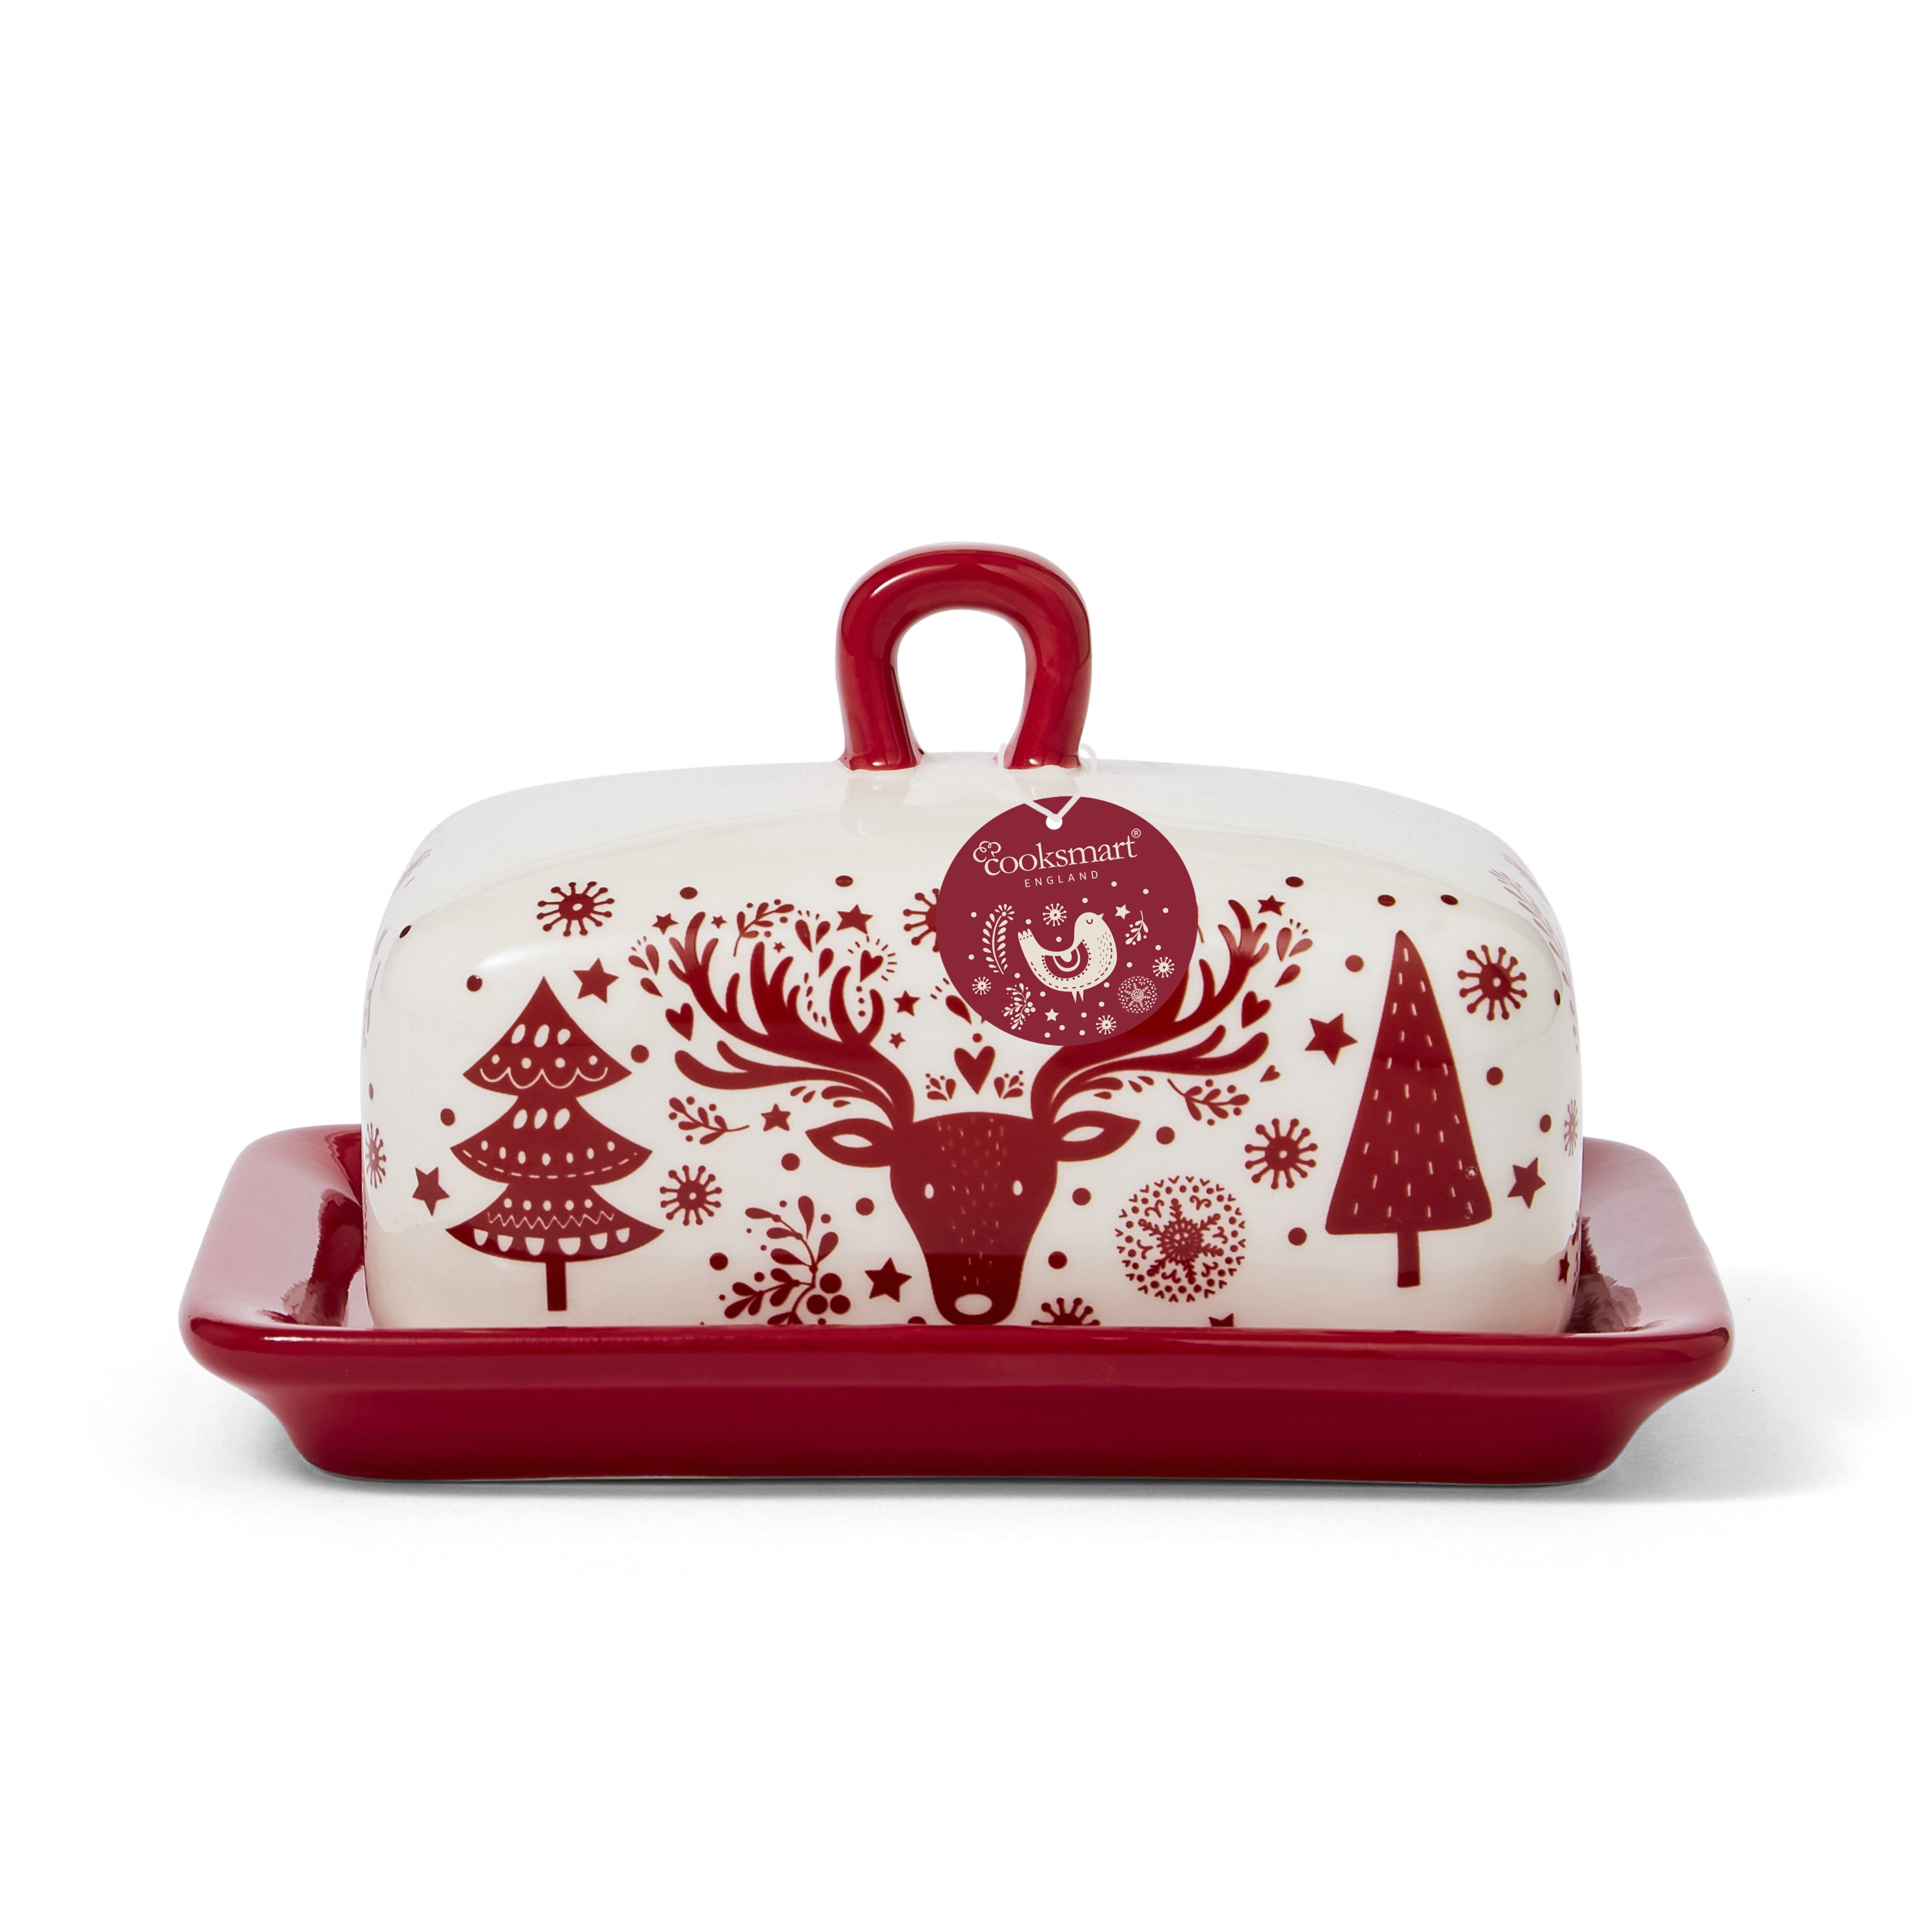 Cooksmart A Nordic Christmas Butter Dish